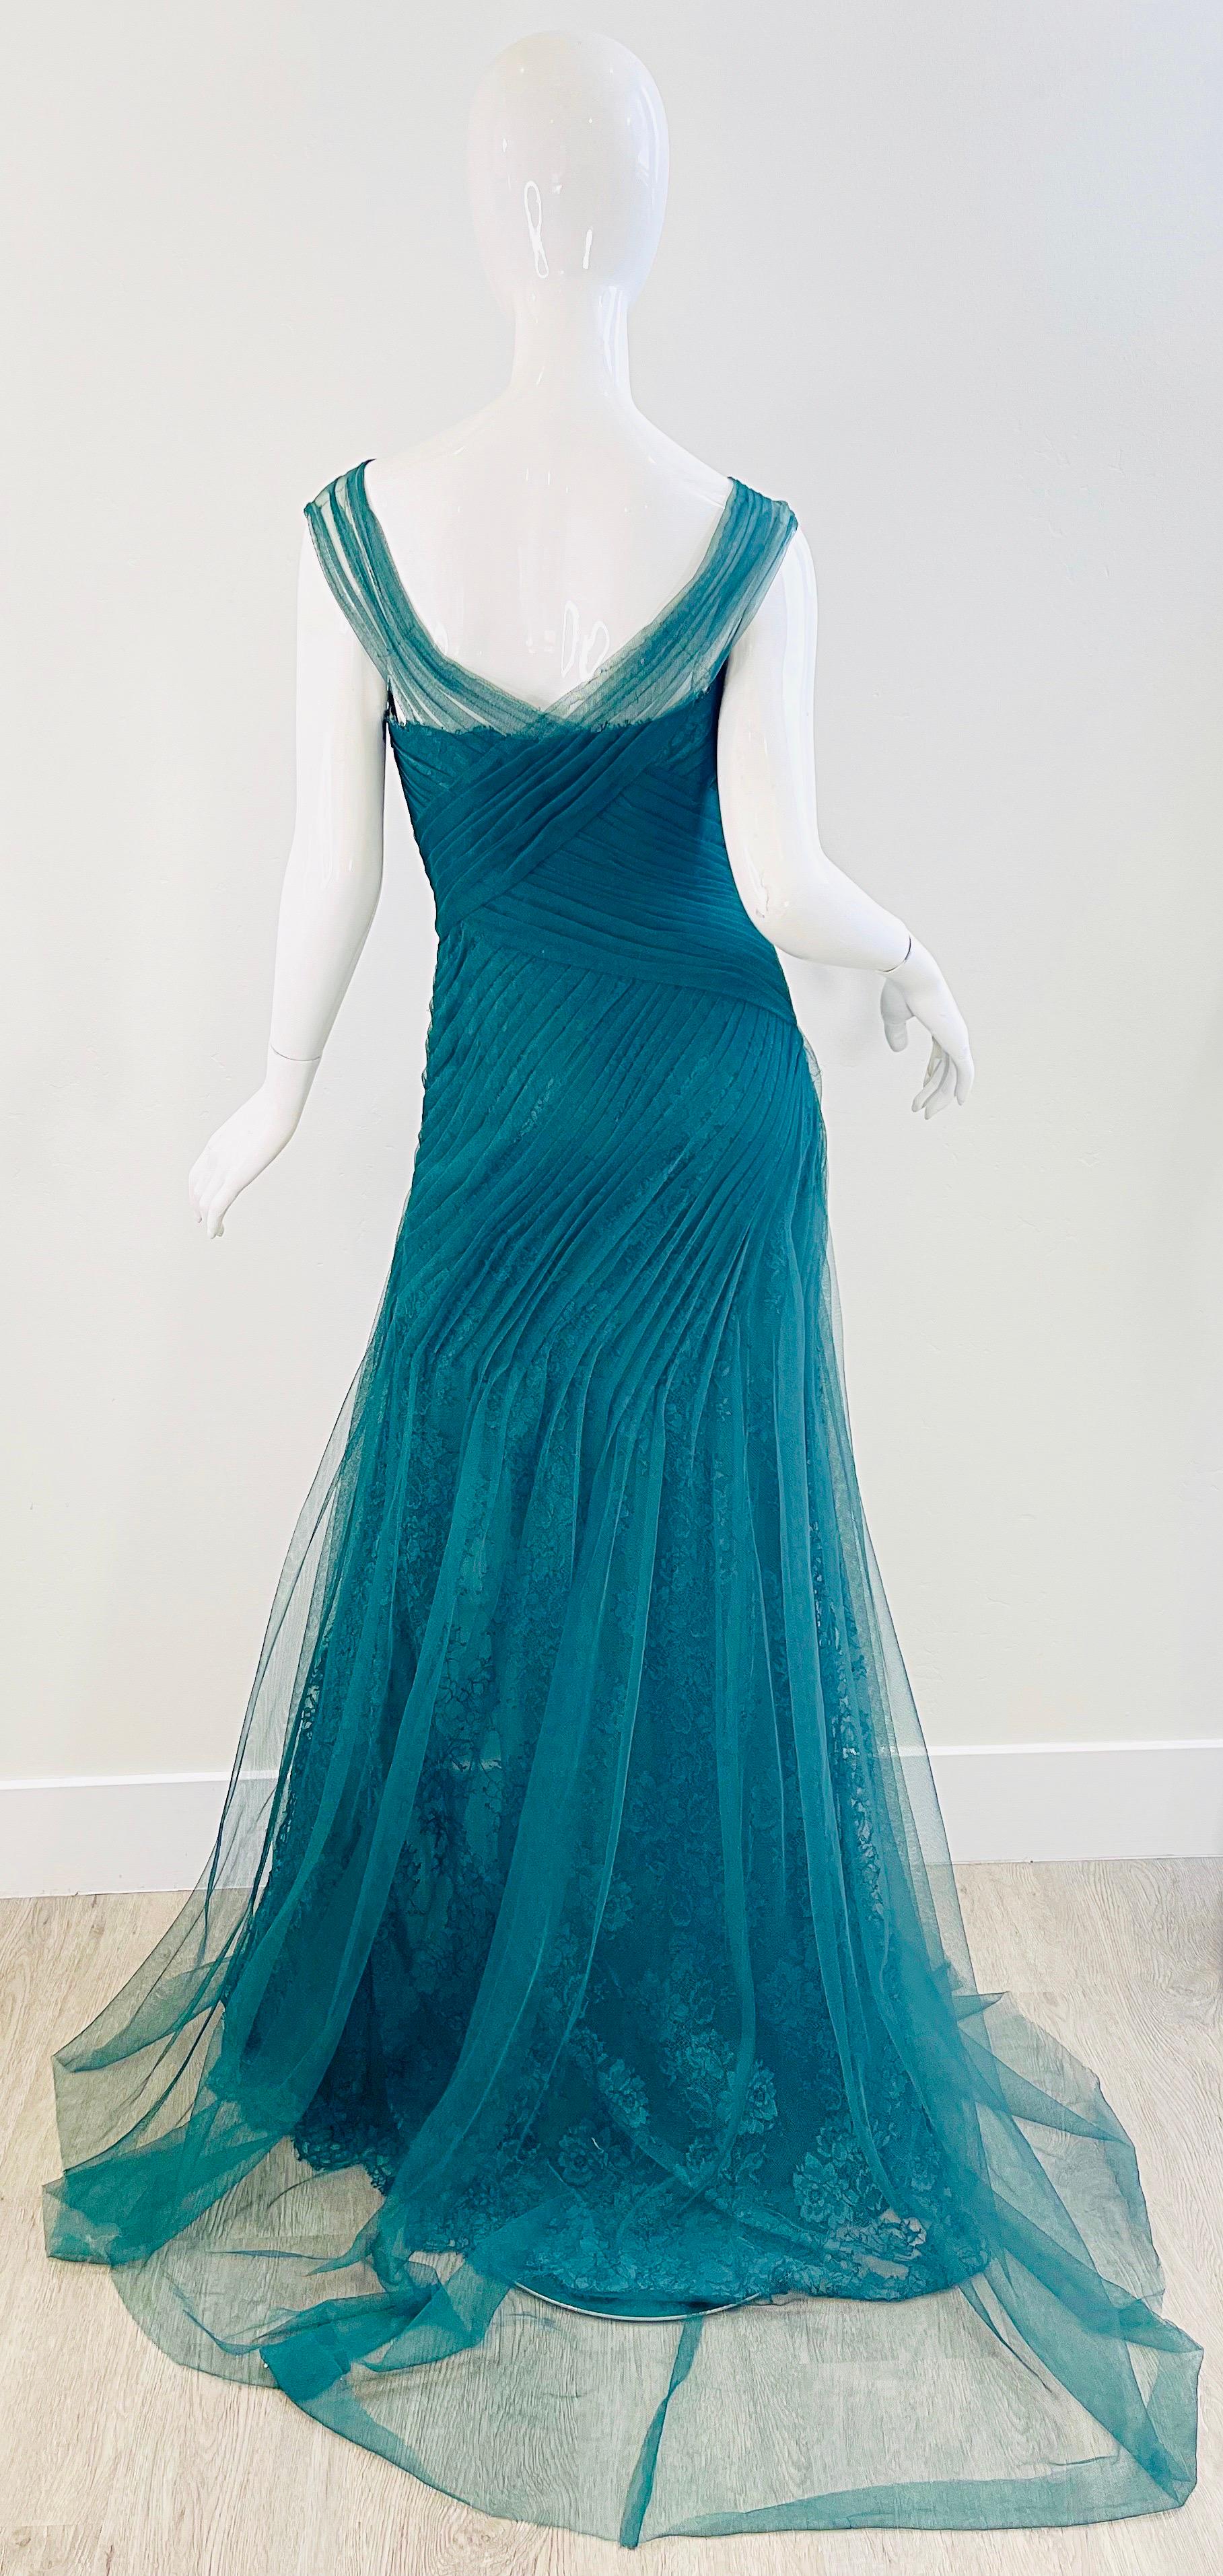 NWT Monique Lhuillier Runway Spring 2013 Size 4 Emerald Green Lace Gown Dress For Sale 10